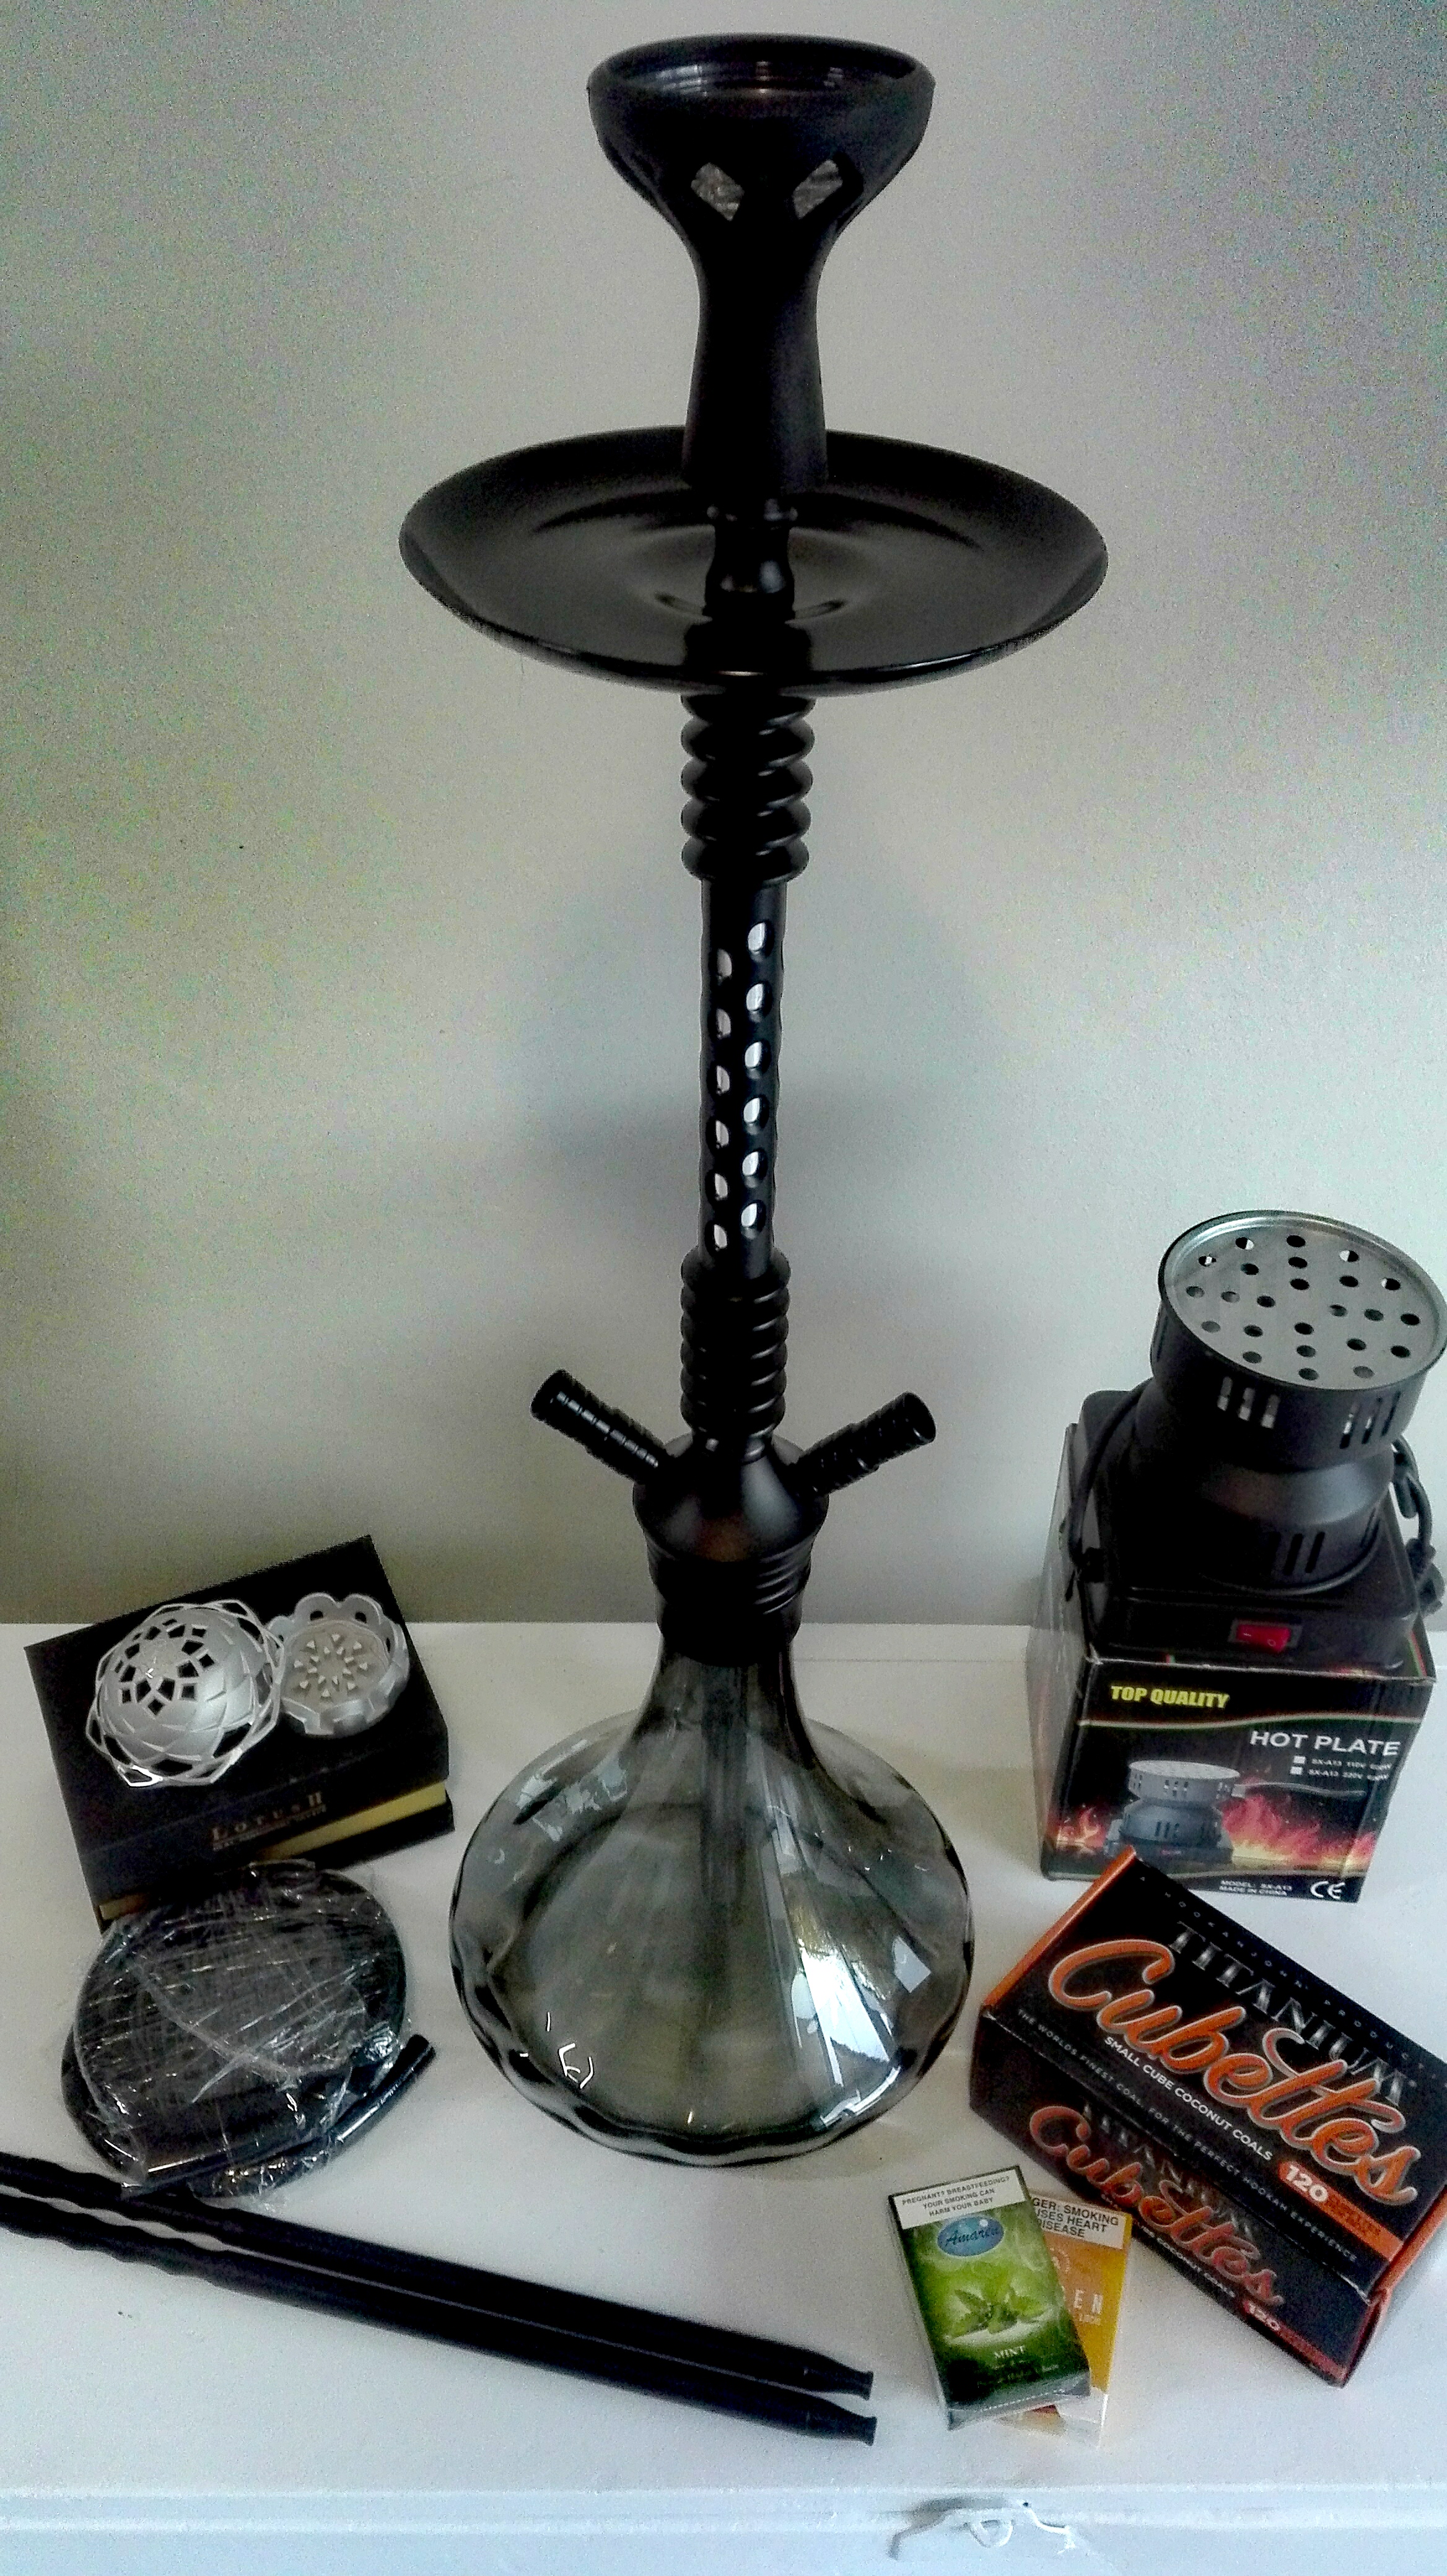 Month end specials on all hookahs, coals, everything